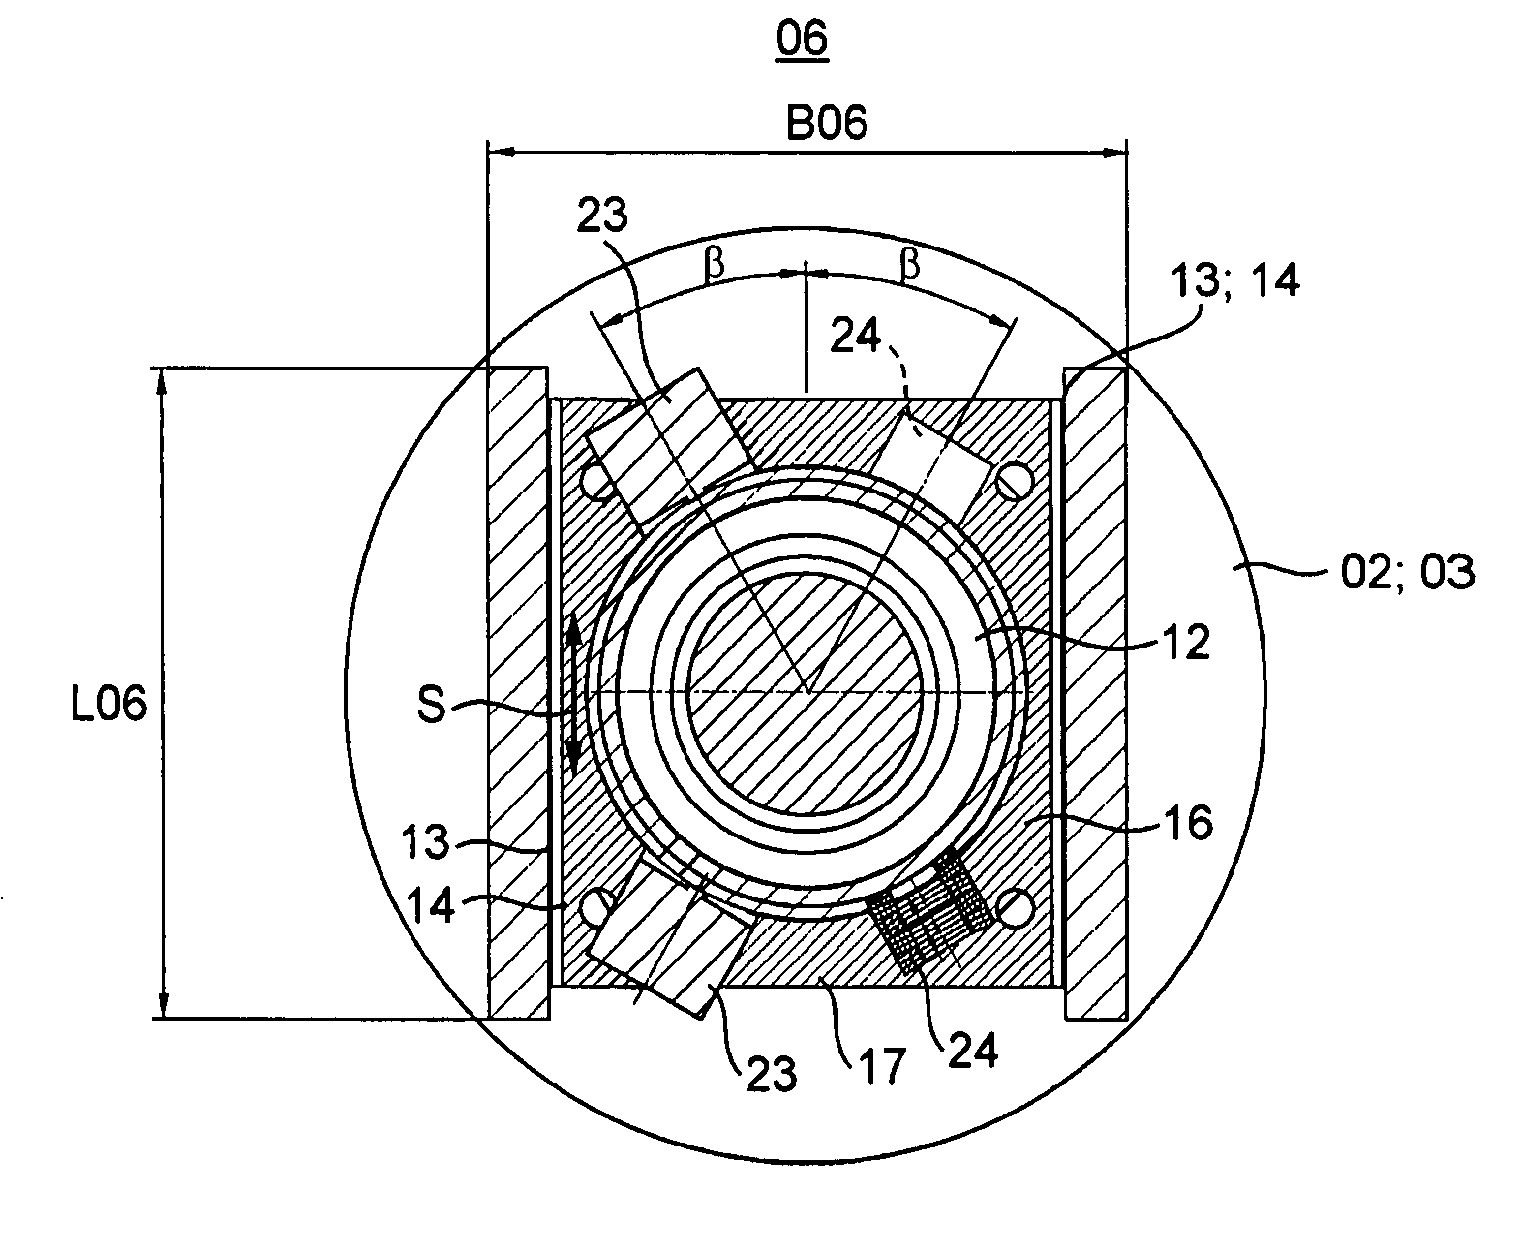 Method and devices for reducing vibration